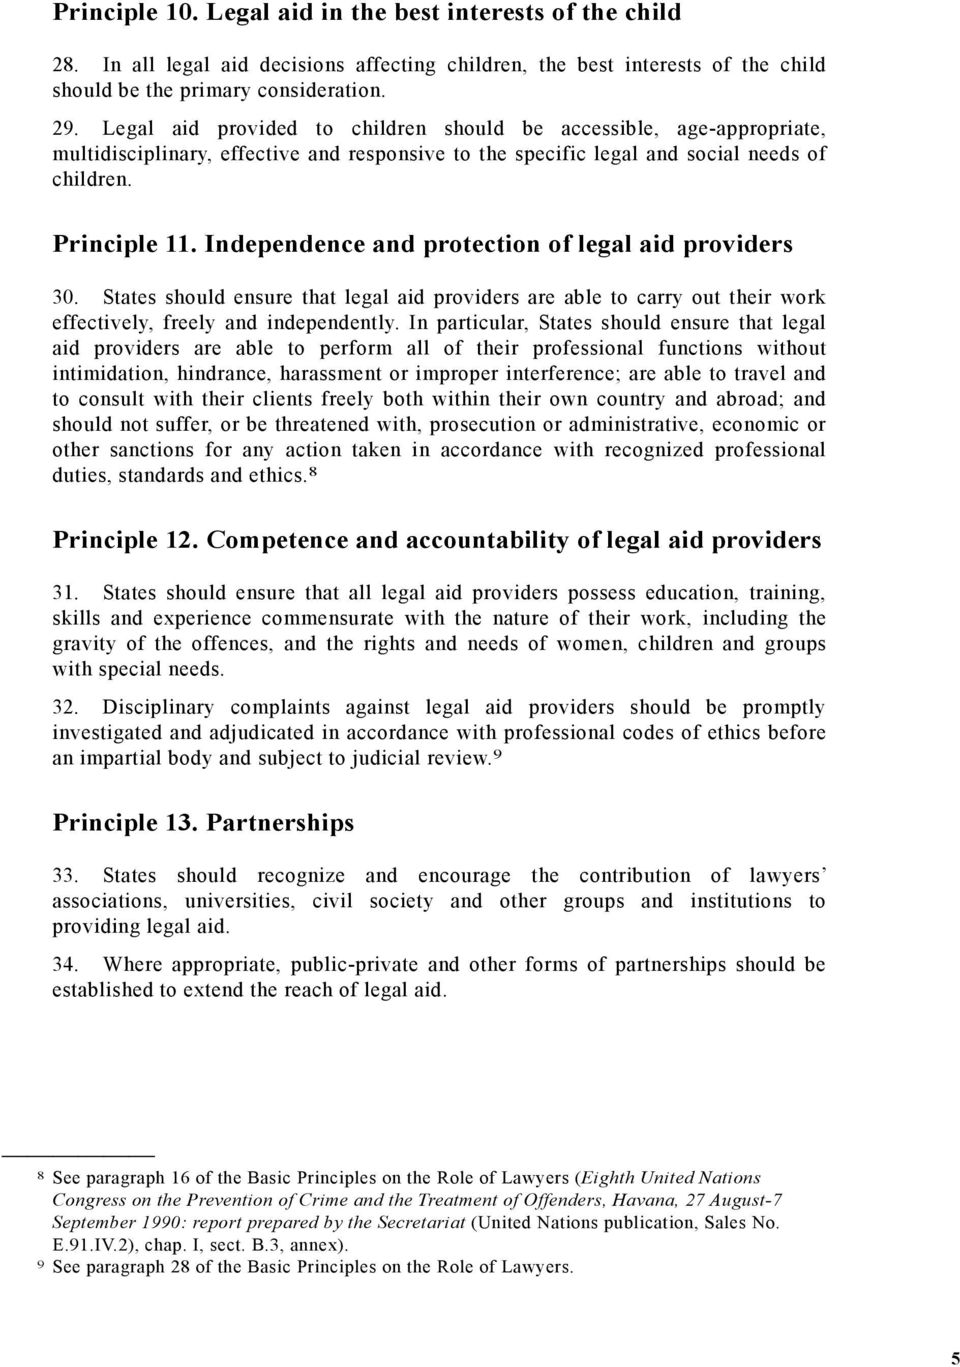 Independence and protection of legal aid providers 30. States should ensure that legal aid providers are able to carry out their work effectively, freely and independently.